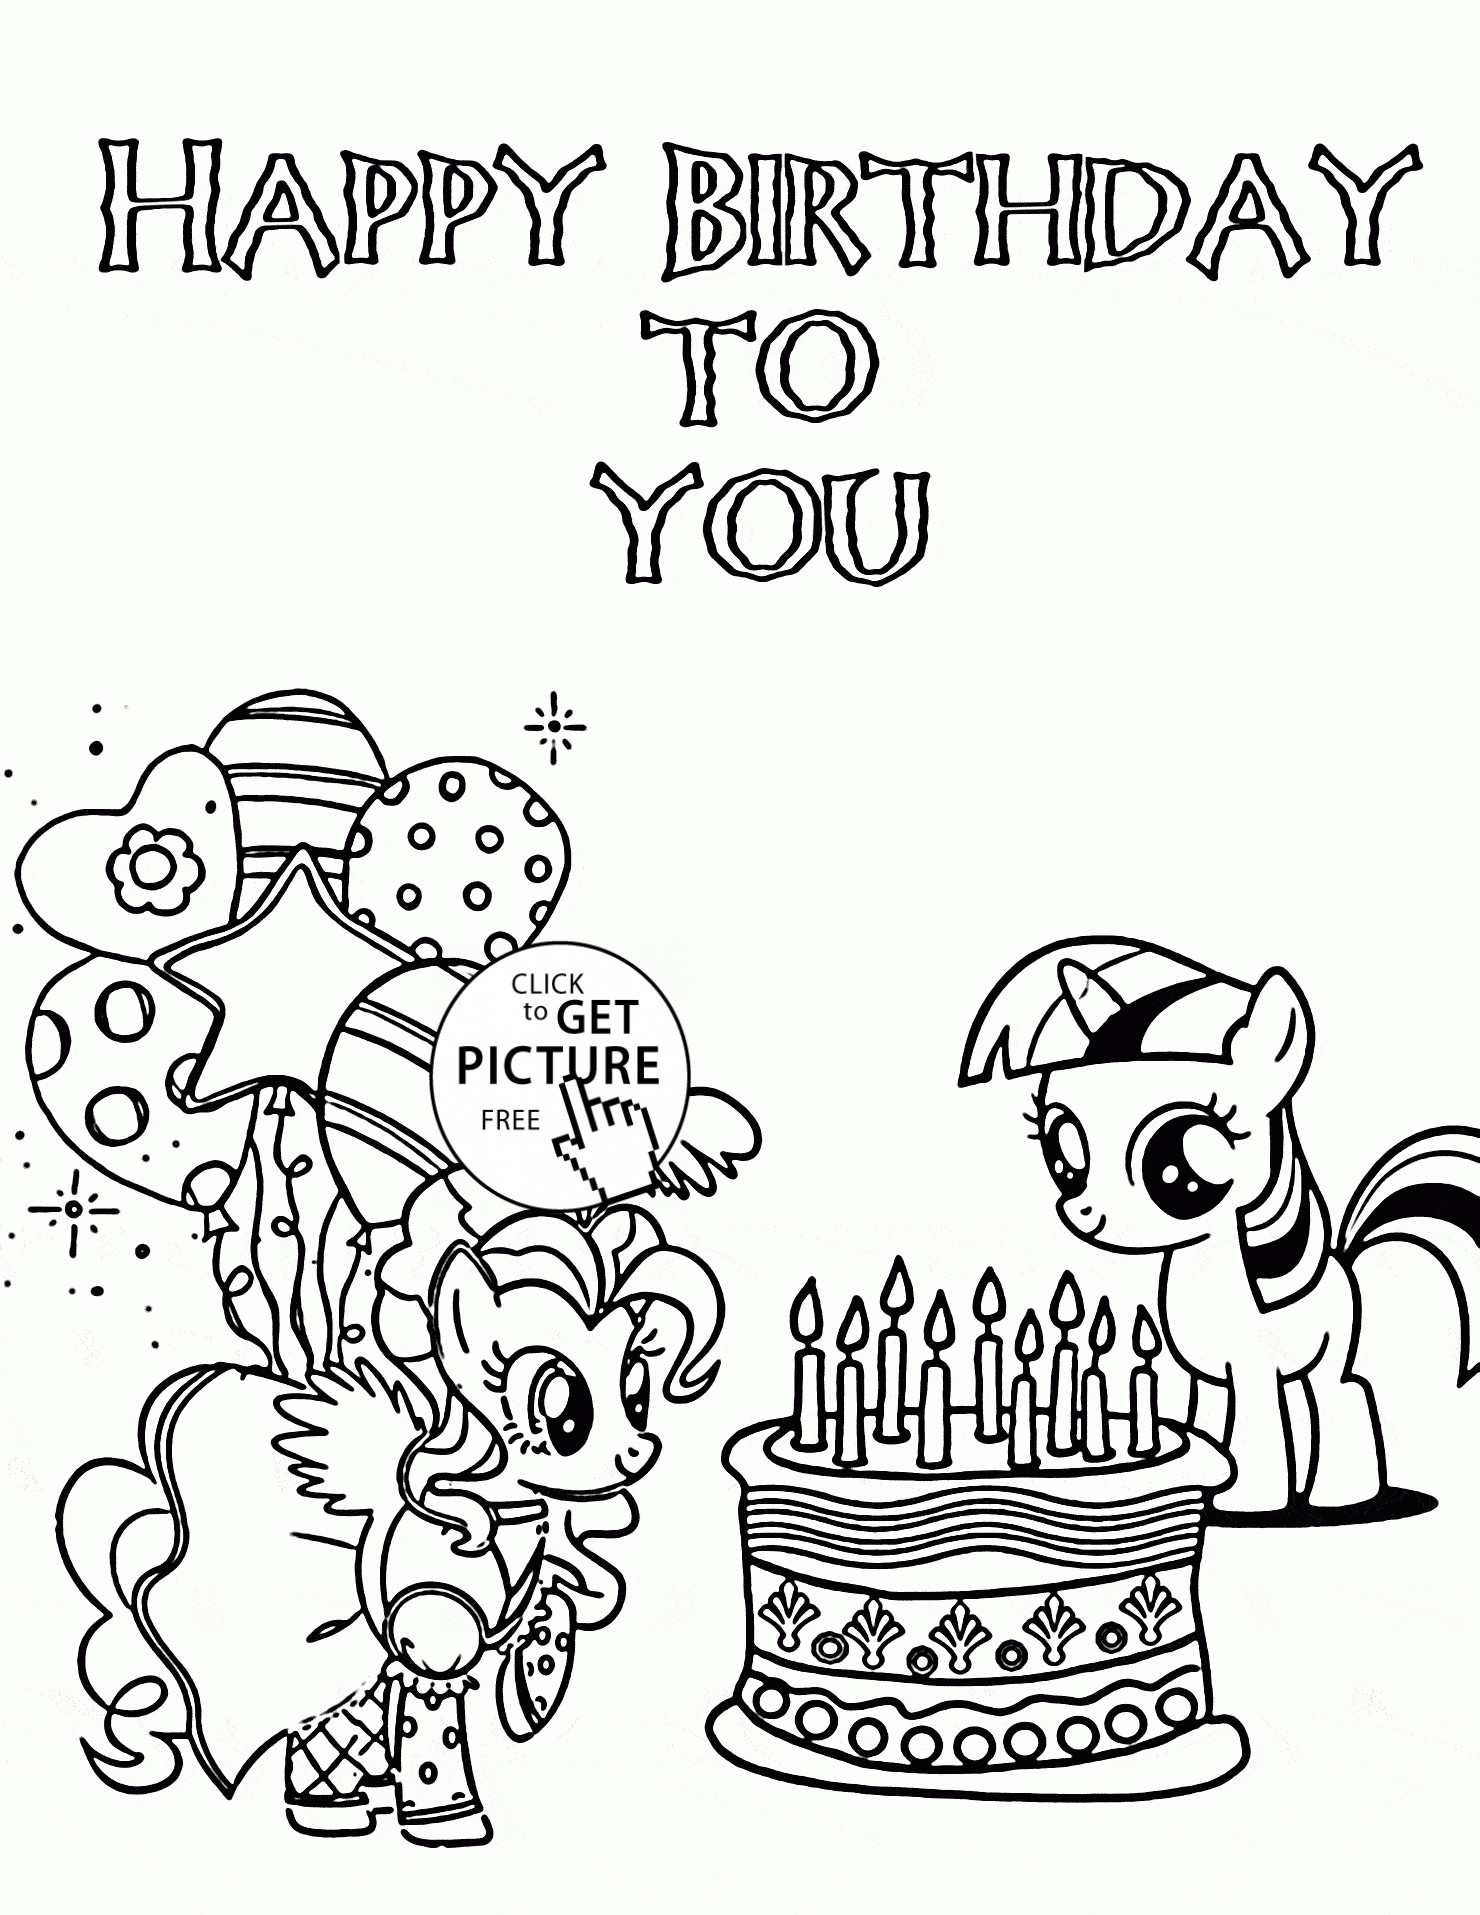 Free Printable Coloring Birthday Card For Teacher